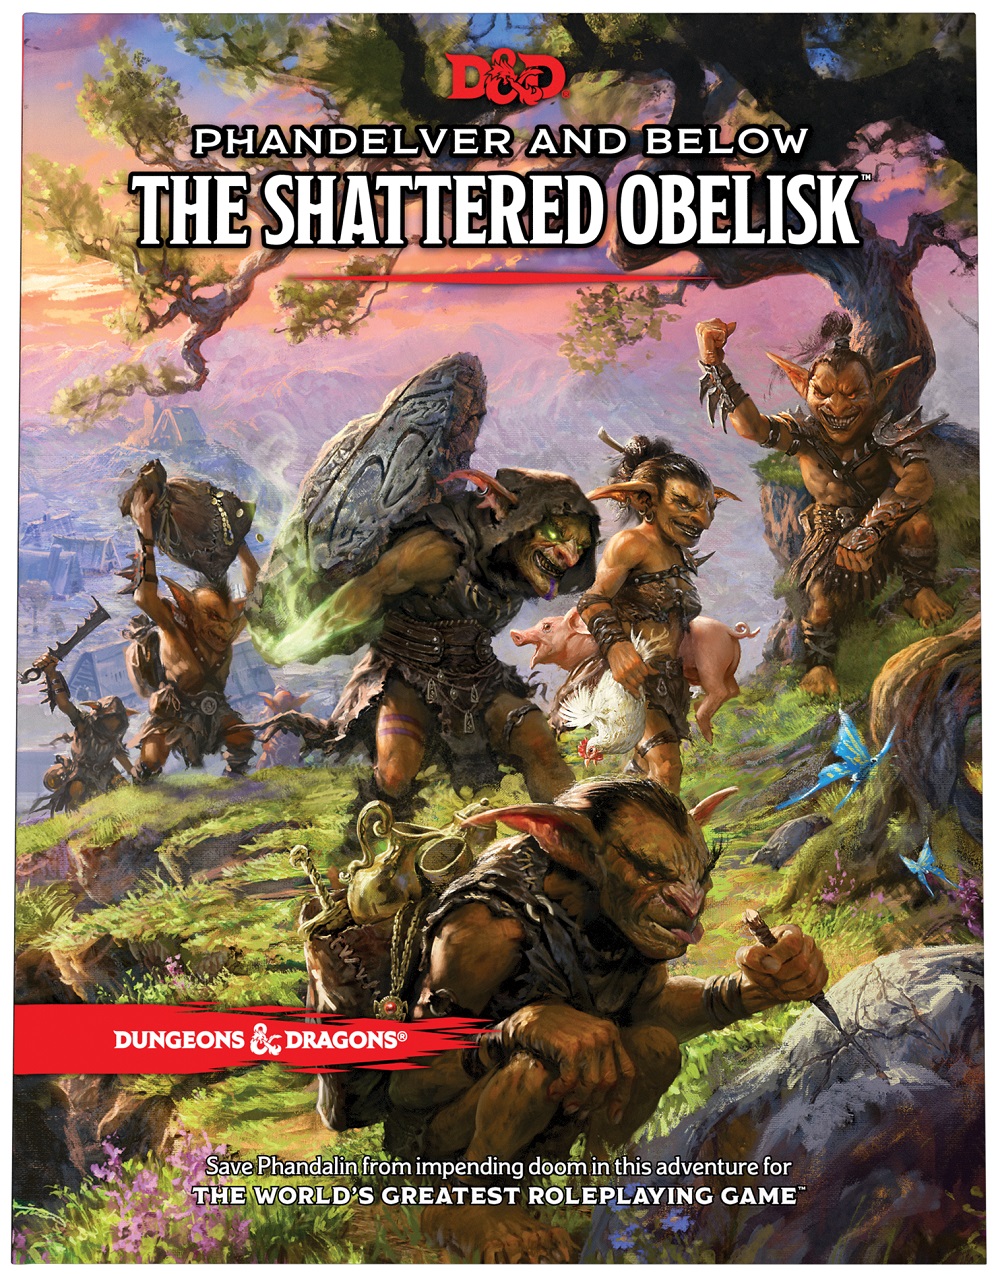 Dungeons & Dragons (5th Ed.): Phandelver and Below: The Shattered Obelisk (HC) 